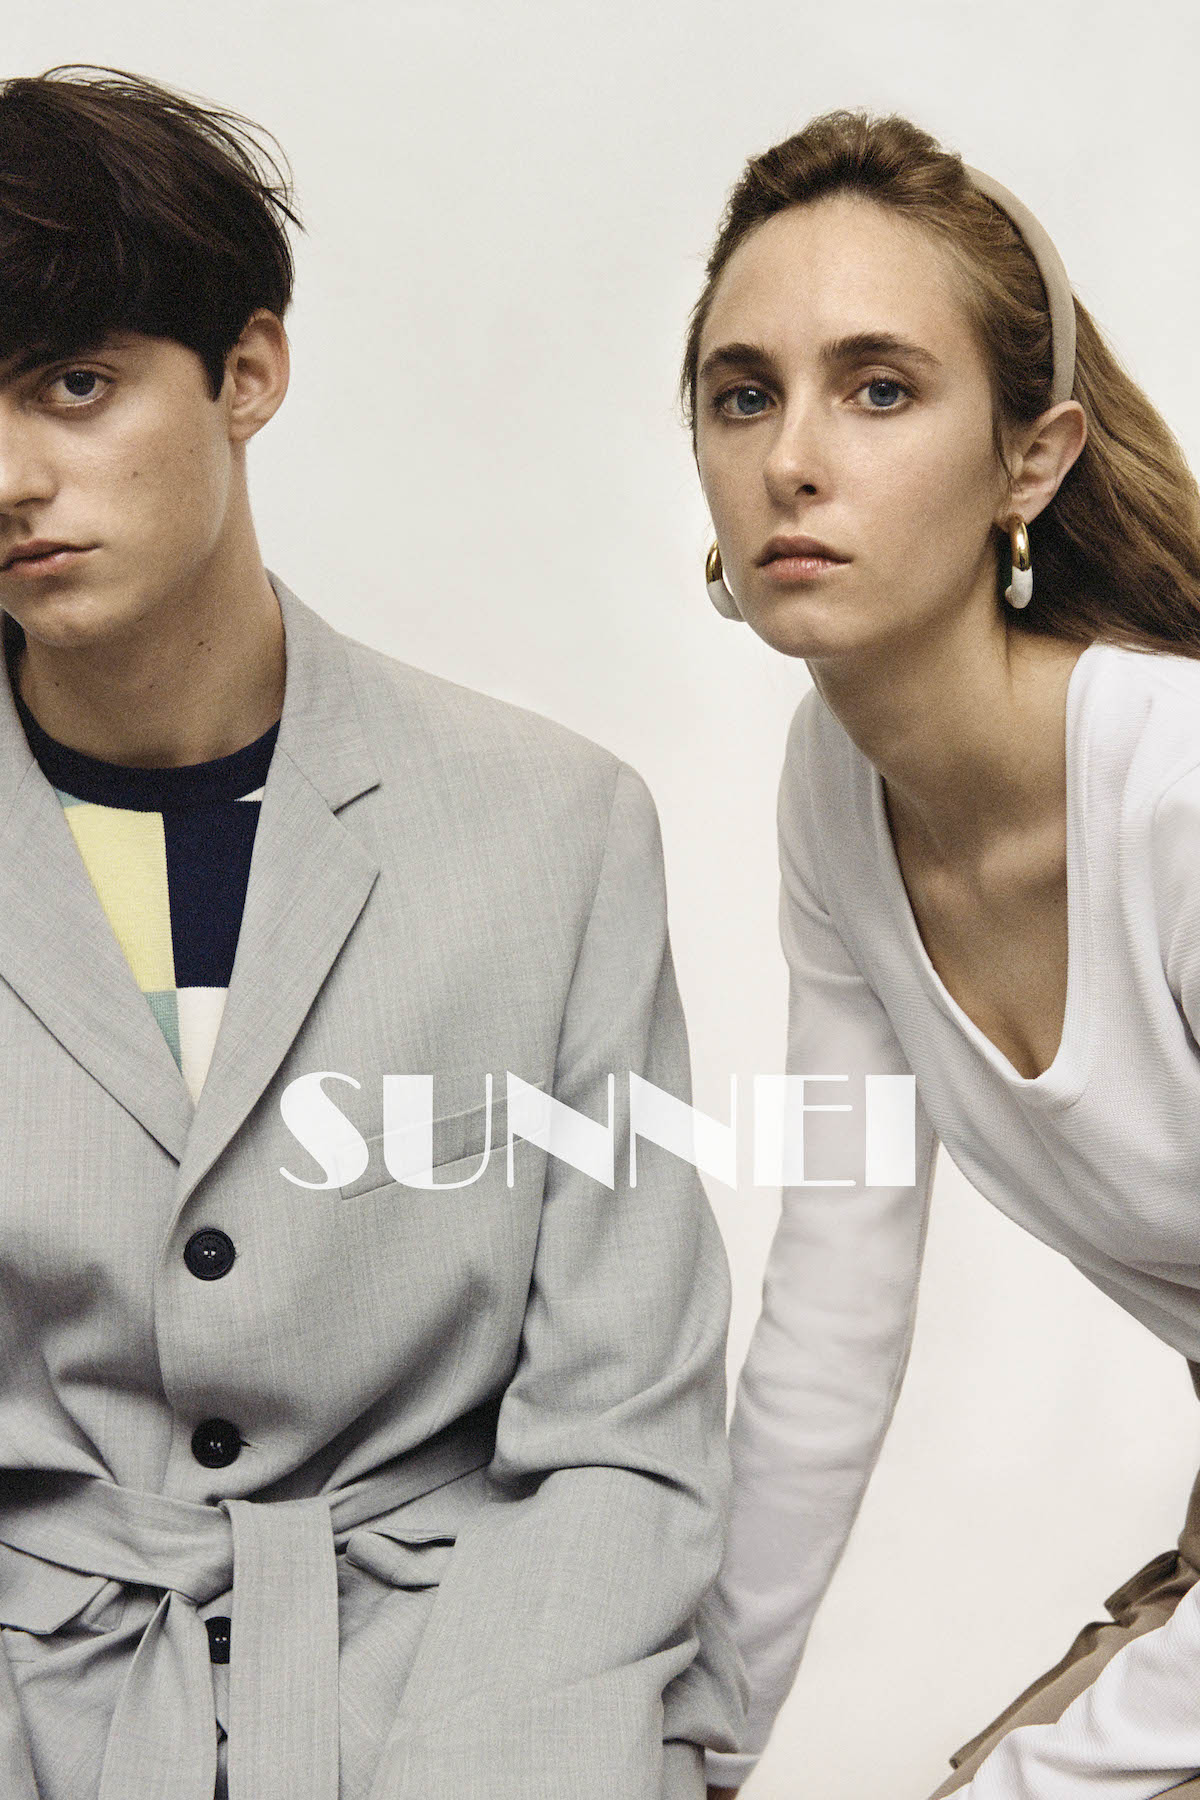 SUNNEI Unveil Their Spring/Summer 2019 Campaign Imagery